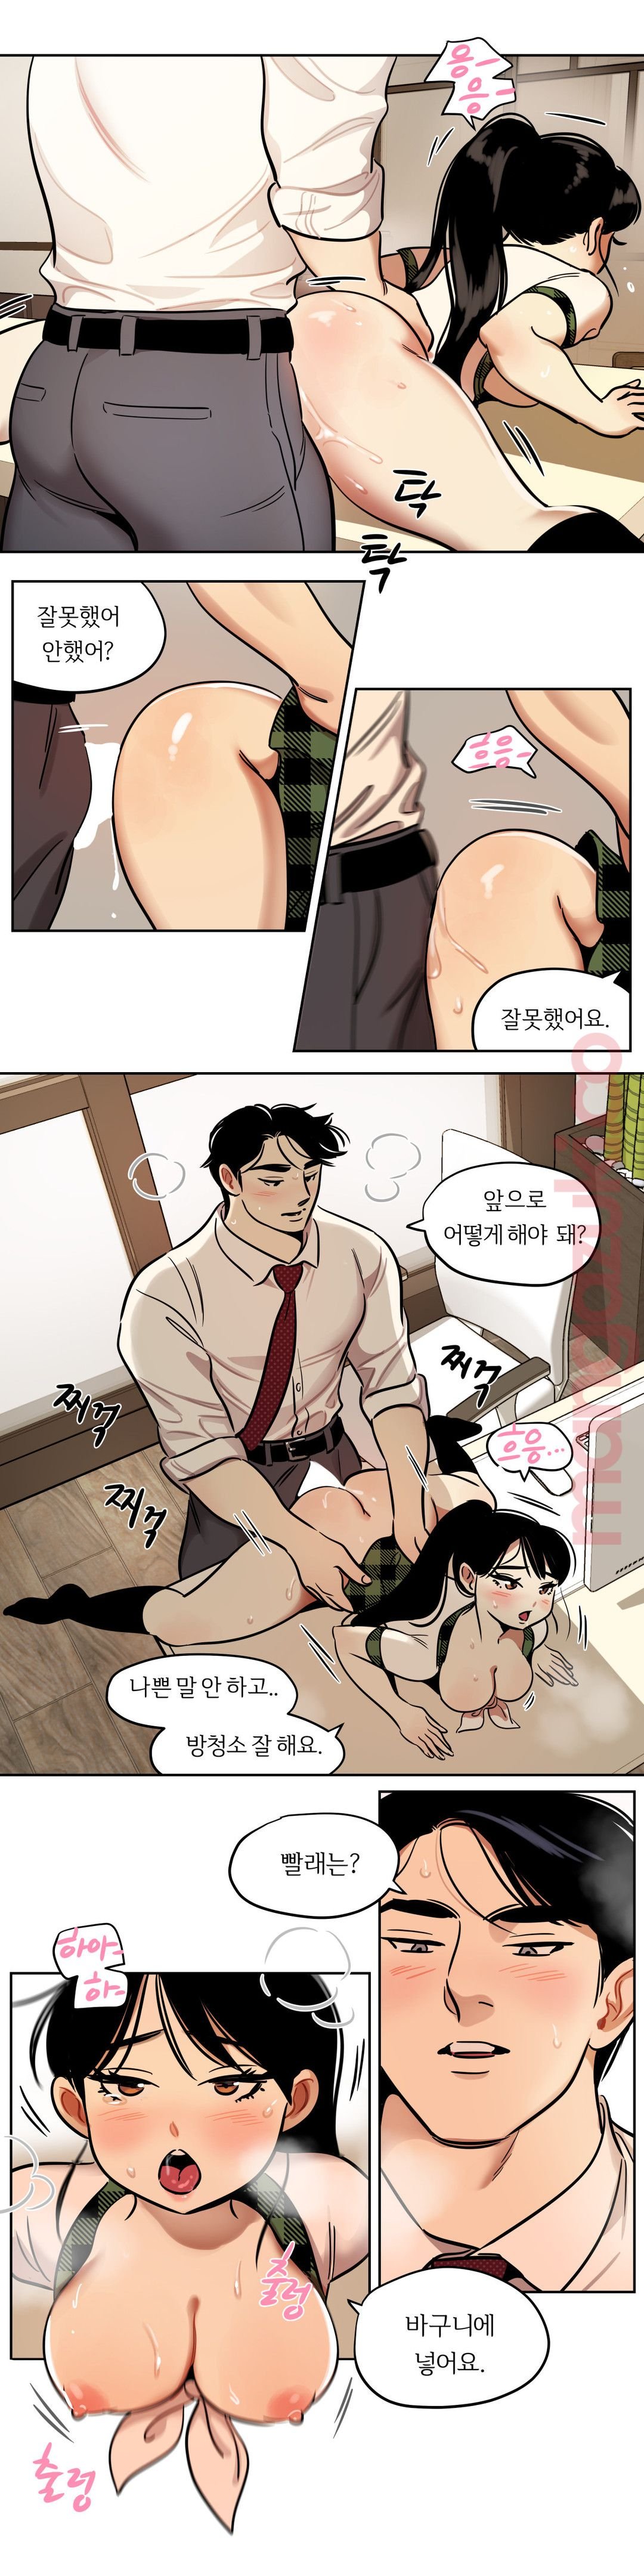 Snowman Raw - Chapter 35 Page 4